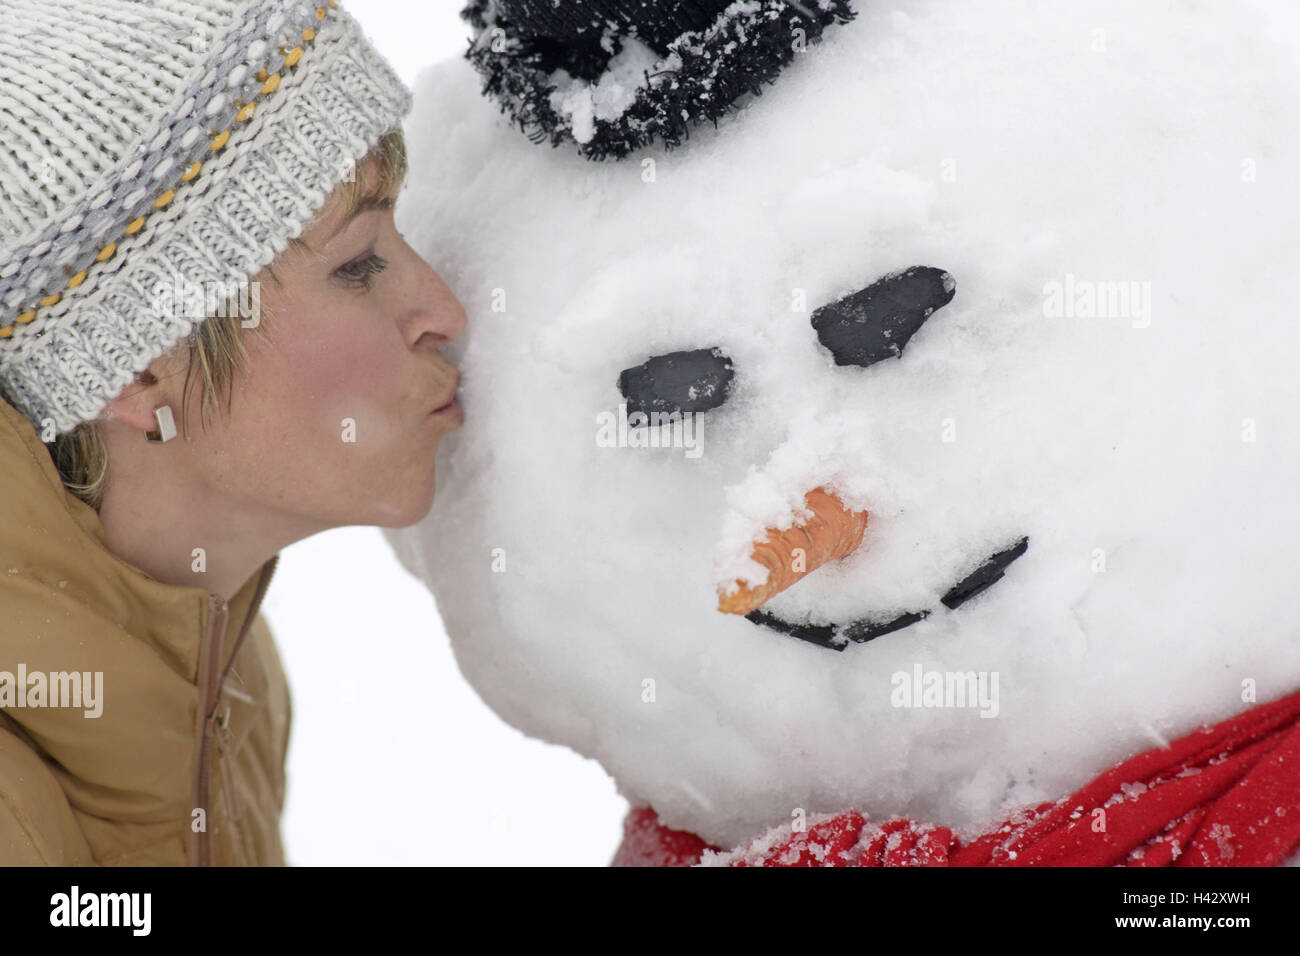 Woman, winter jacket, cap, snowman,,  Kiss, side portrait, winters,   Series, 20-30 years, winter clothing, rope cap, headgear, snow figure, kiss, fun, pleasantry, jokes, freely, cheerfully, naturalness, joy, leisure time, zest for life, Lifestyle, outside, winter vacation, vacation,, Stock Photo